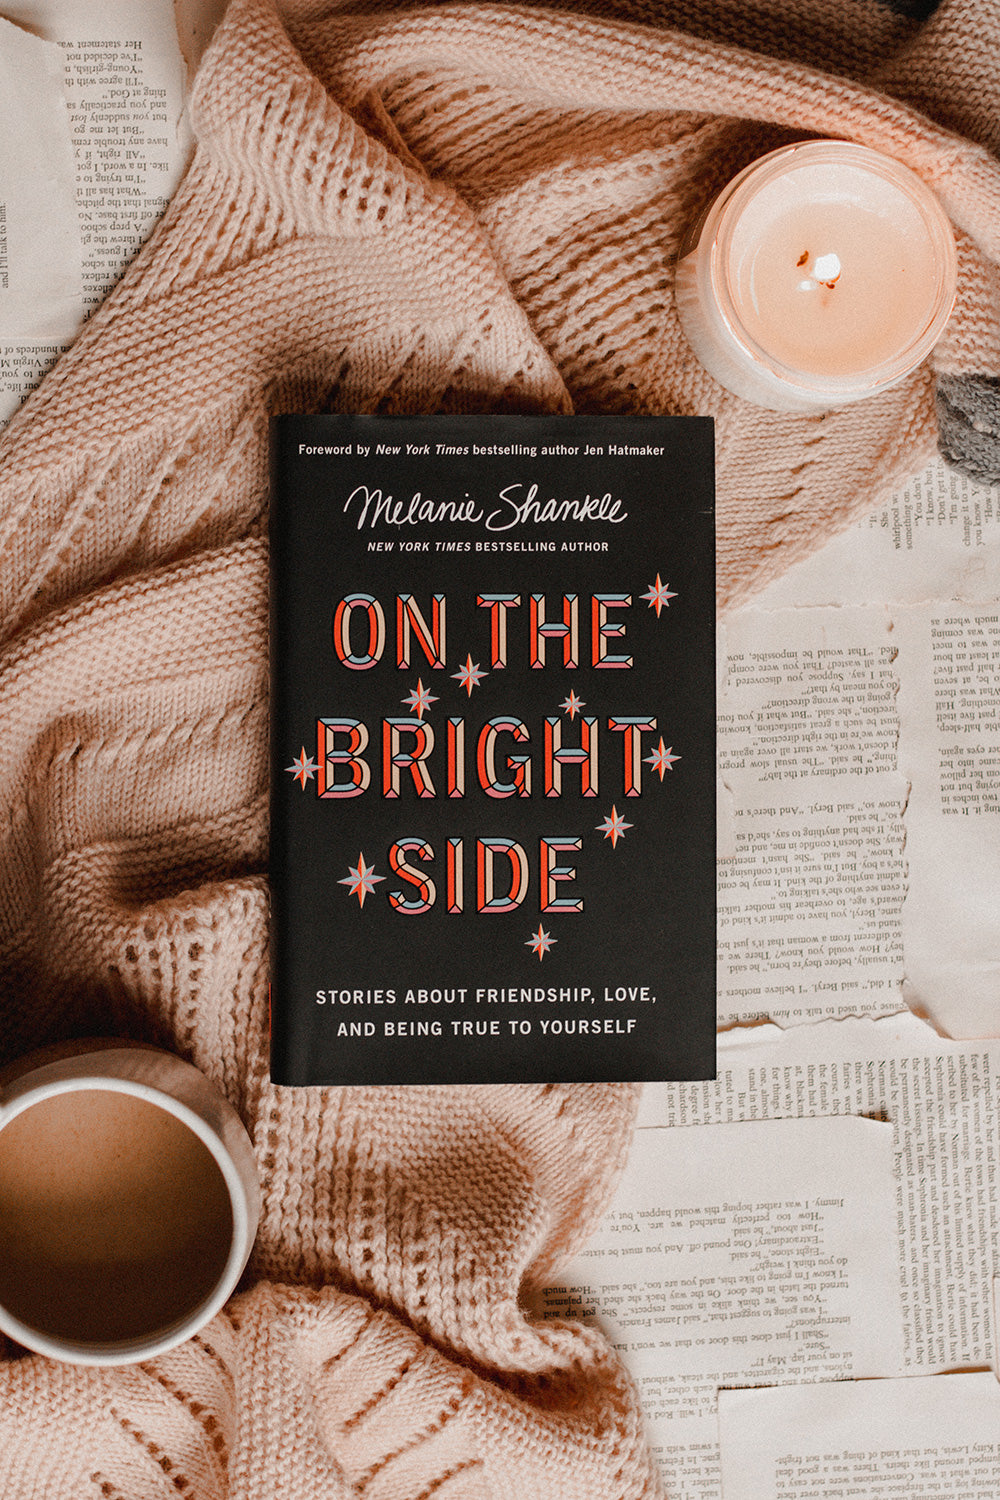 On the Bright Side by Melanie Shankle